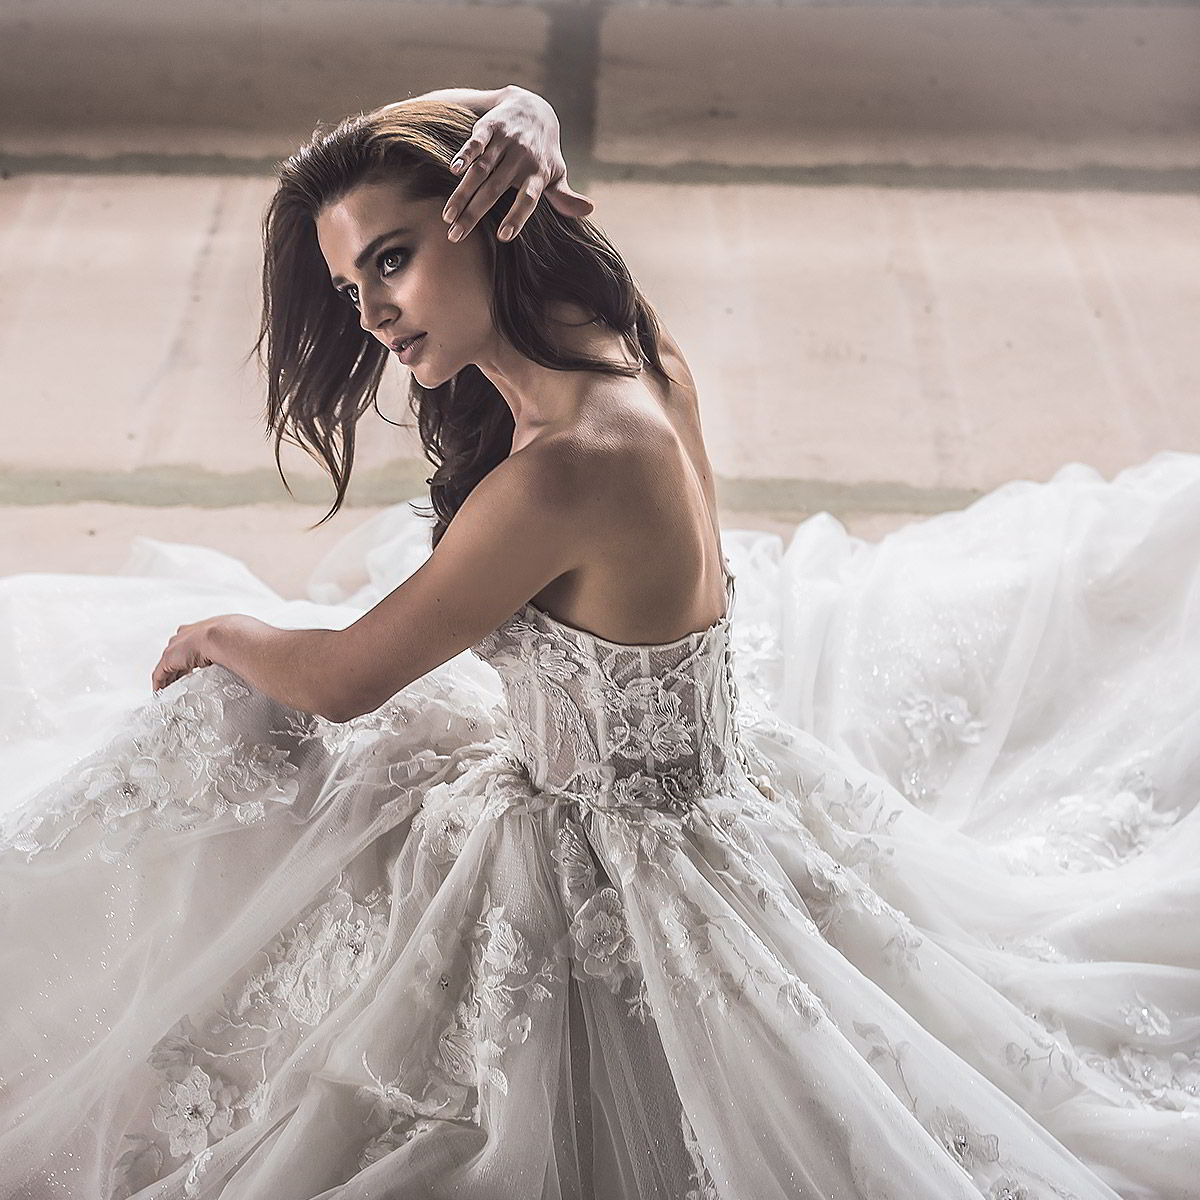 yaniv persy spring 2020 bridal couture collection featured on wedding inspirasi thumbnail